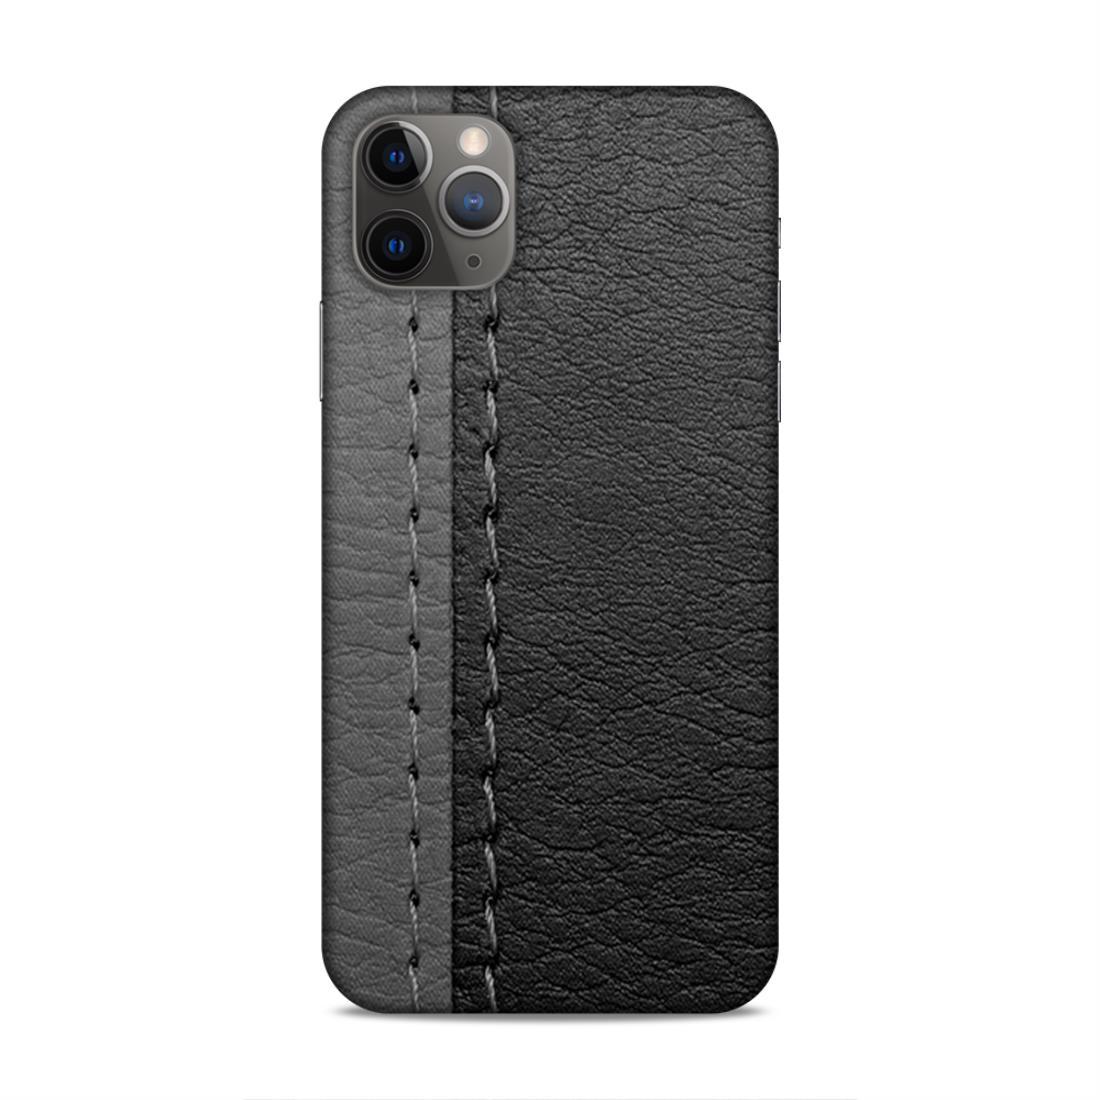 Light Dark Grey iPhone 11 Pro Max Mobile Back Cover